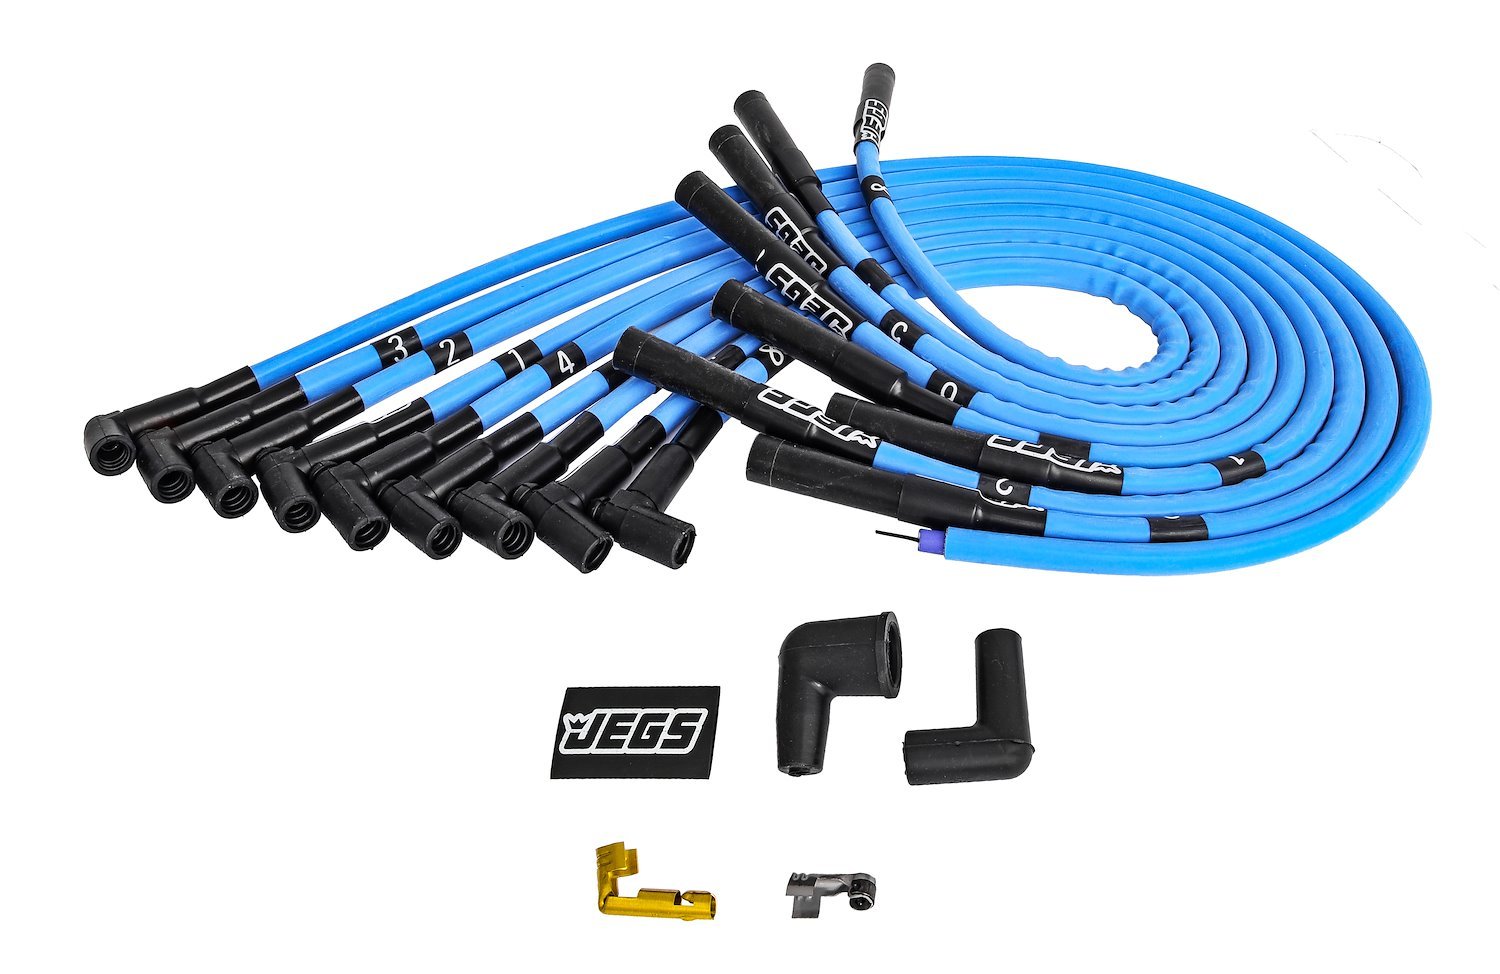 8mm Hi-Temp Sleeved Spark Plug Wire Set for Big Block Chevy 396, 402, & 454 w/HEI, Over Valve Cover w/Straight Boots [Blue]